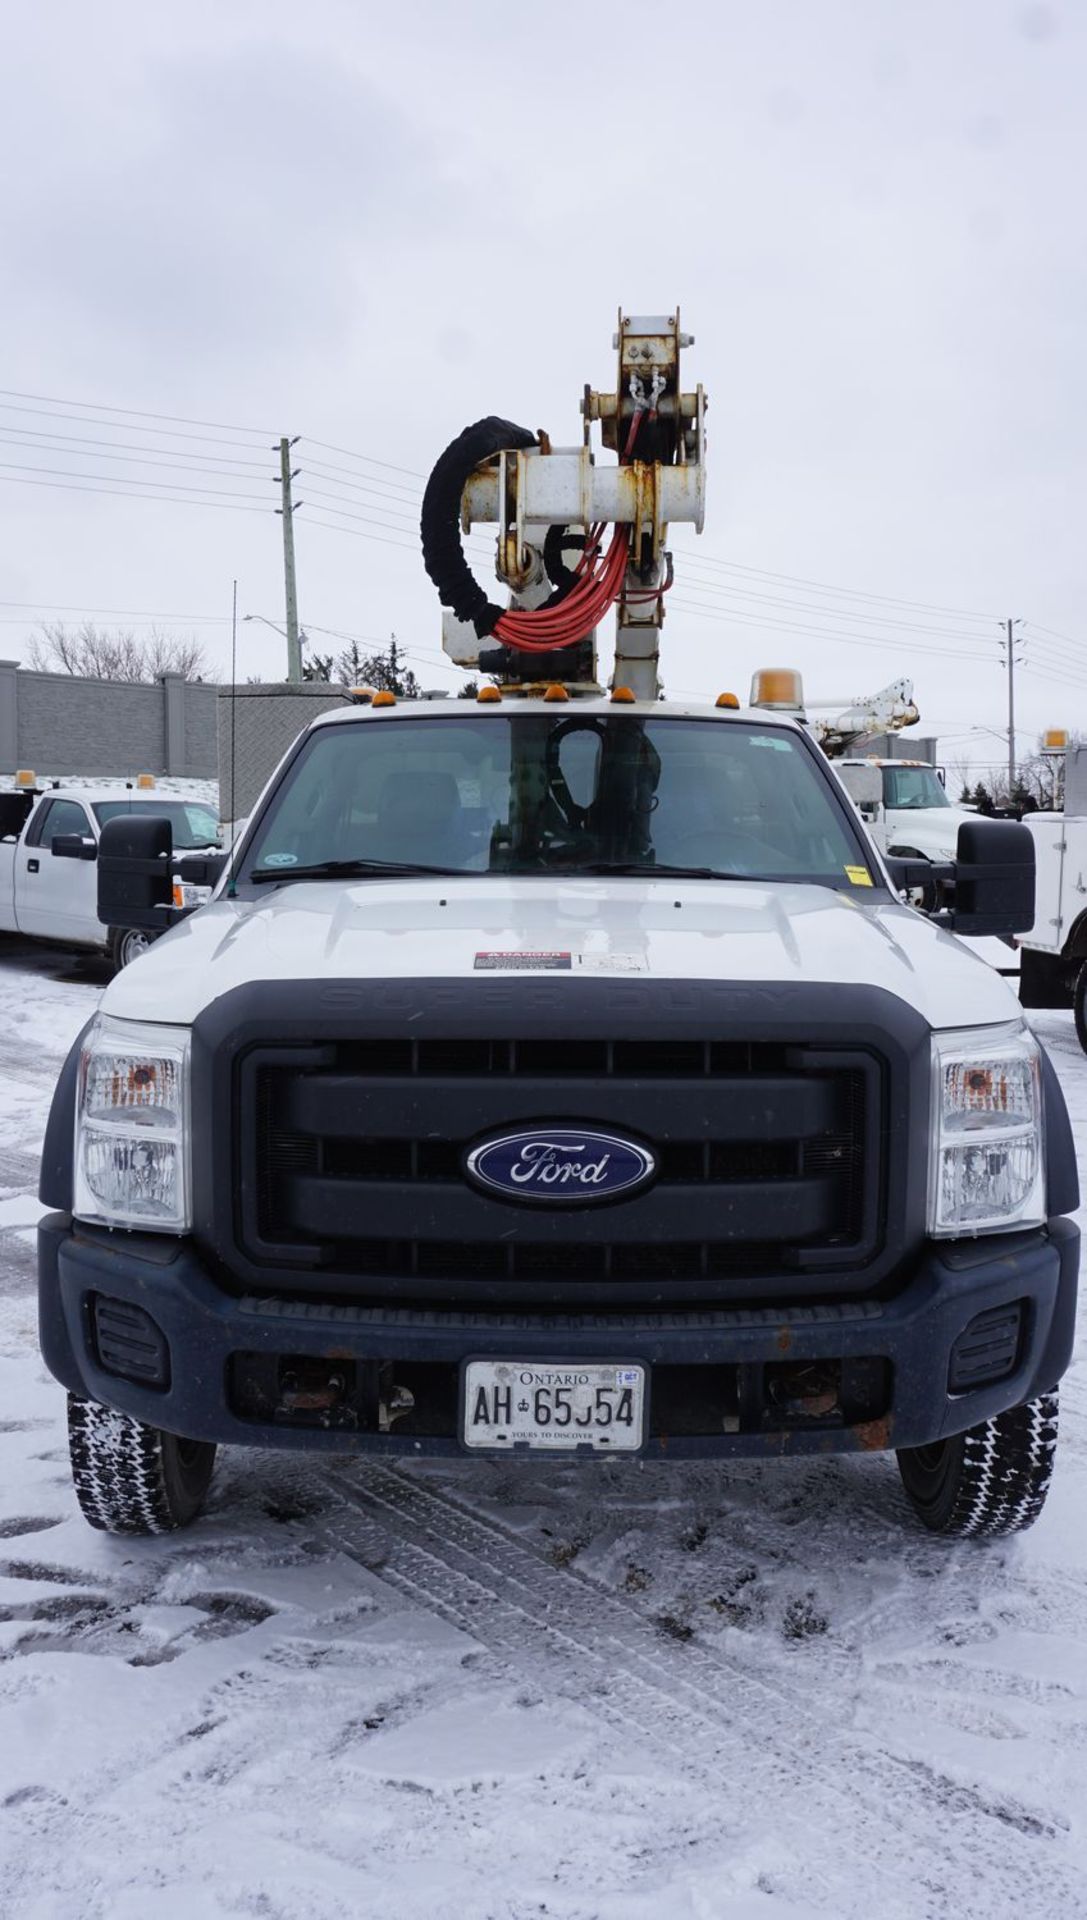 2014 ALTEC AT37G ARTICULATING TELESCOPIC BOOM & BUCKET MOUNTED ON 2014 FORD F550XL SUPER DUTY 4X4 - Image 3 of 16